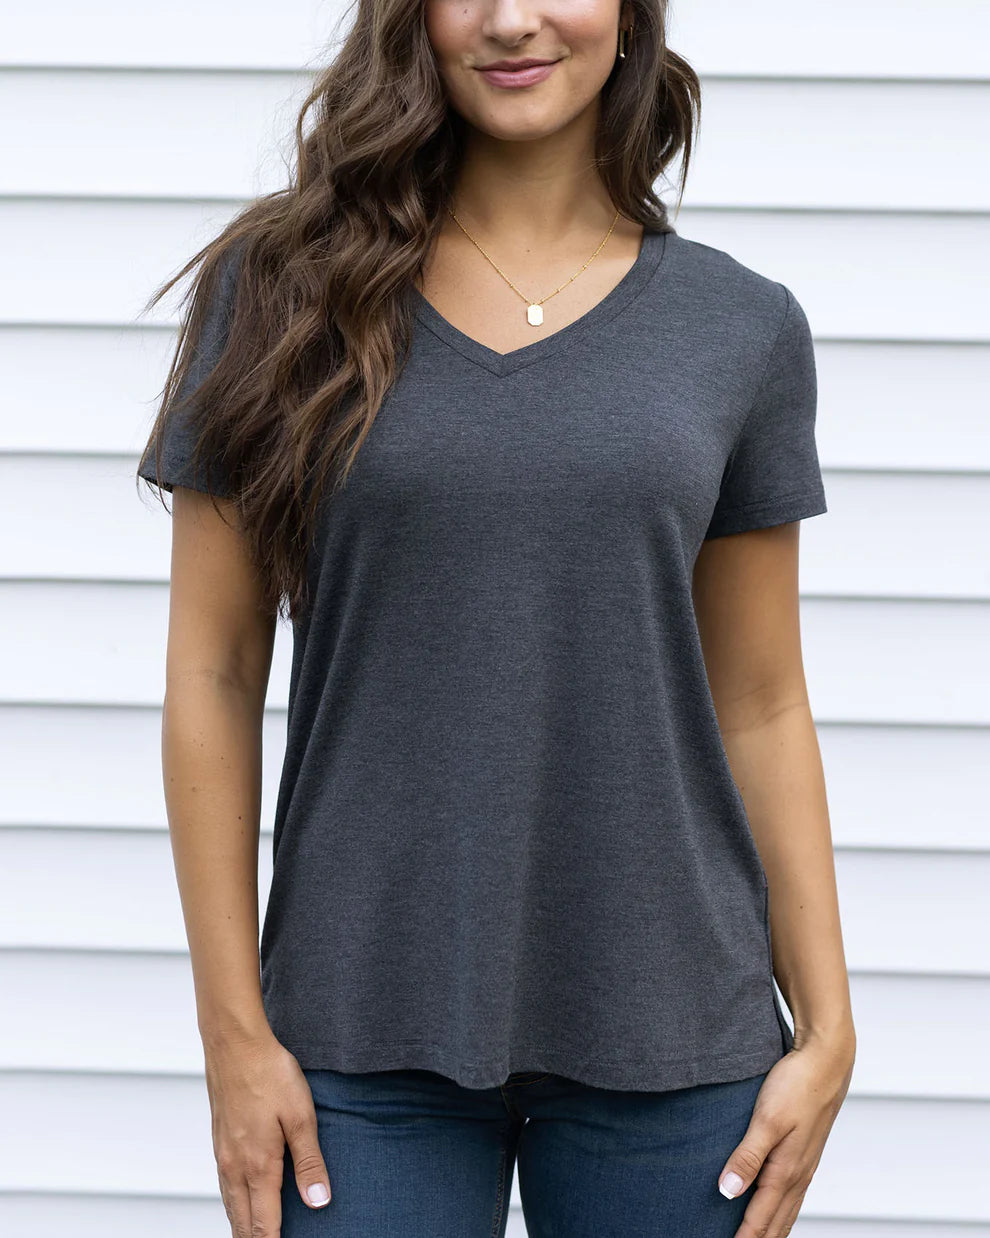 Grace & Lace VIP Favorite Perfect V-Neck Tee - Charcoal